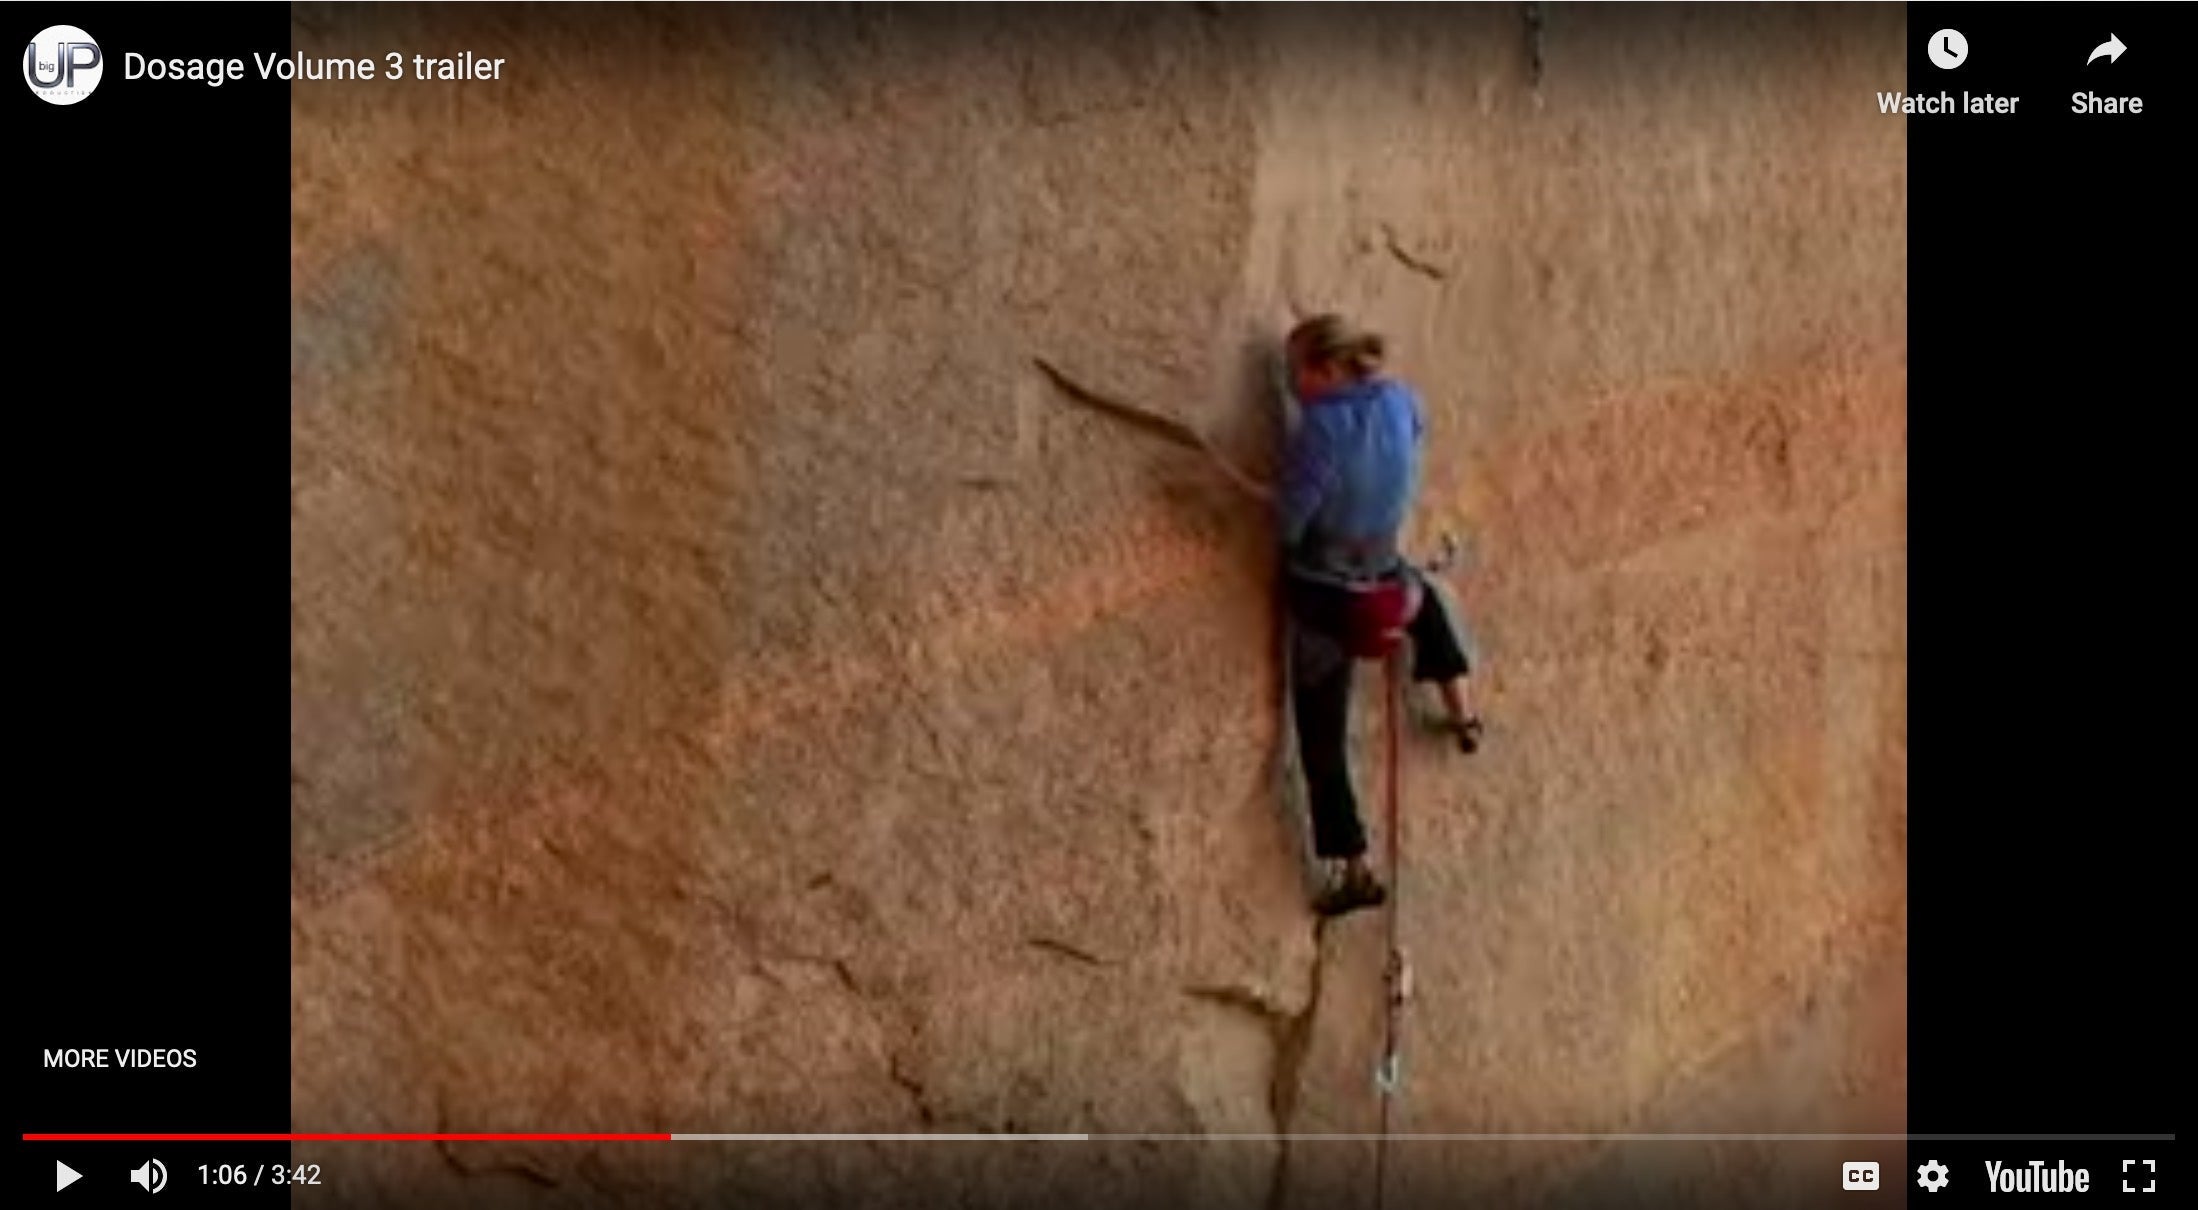 Beth Rodden features in Dosage Volume 3 climbing film collection.